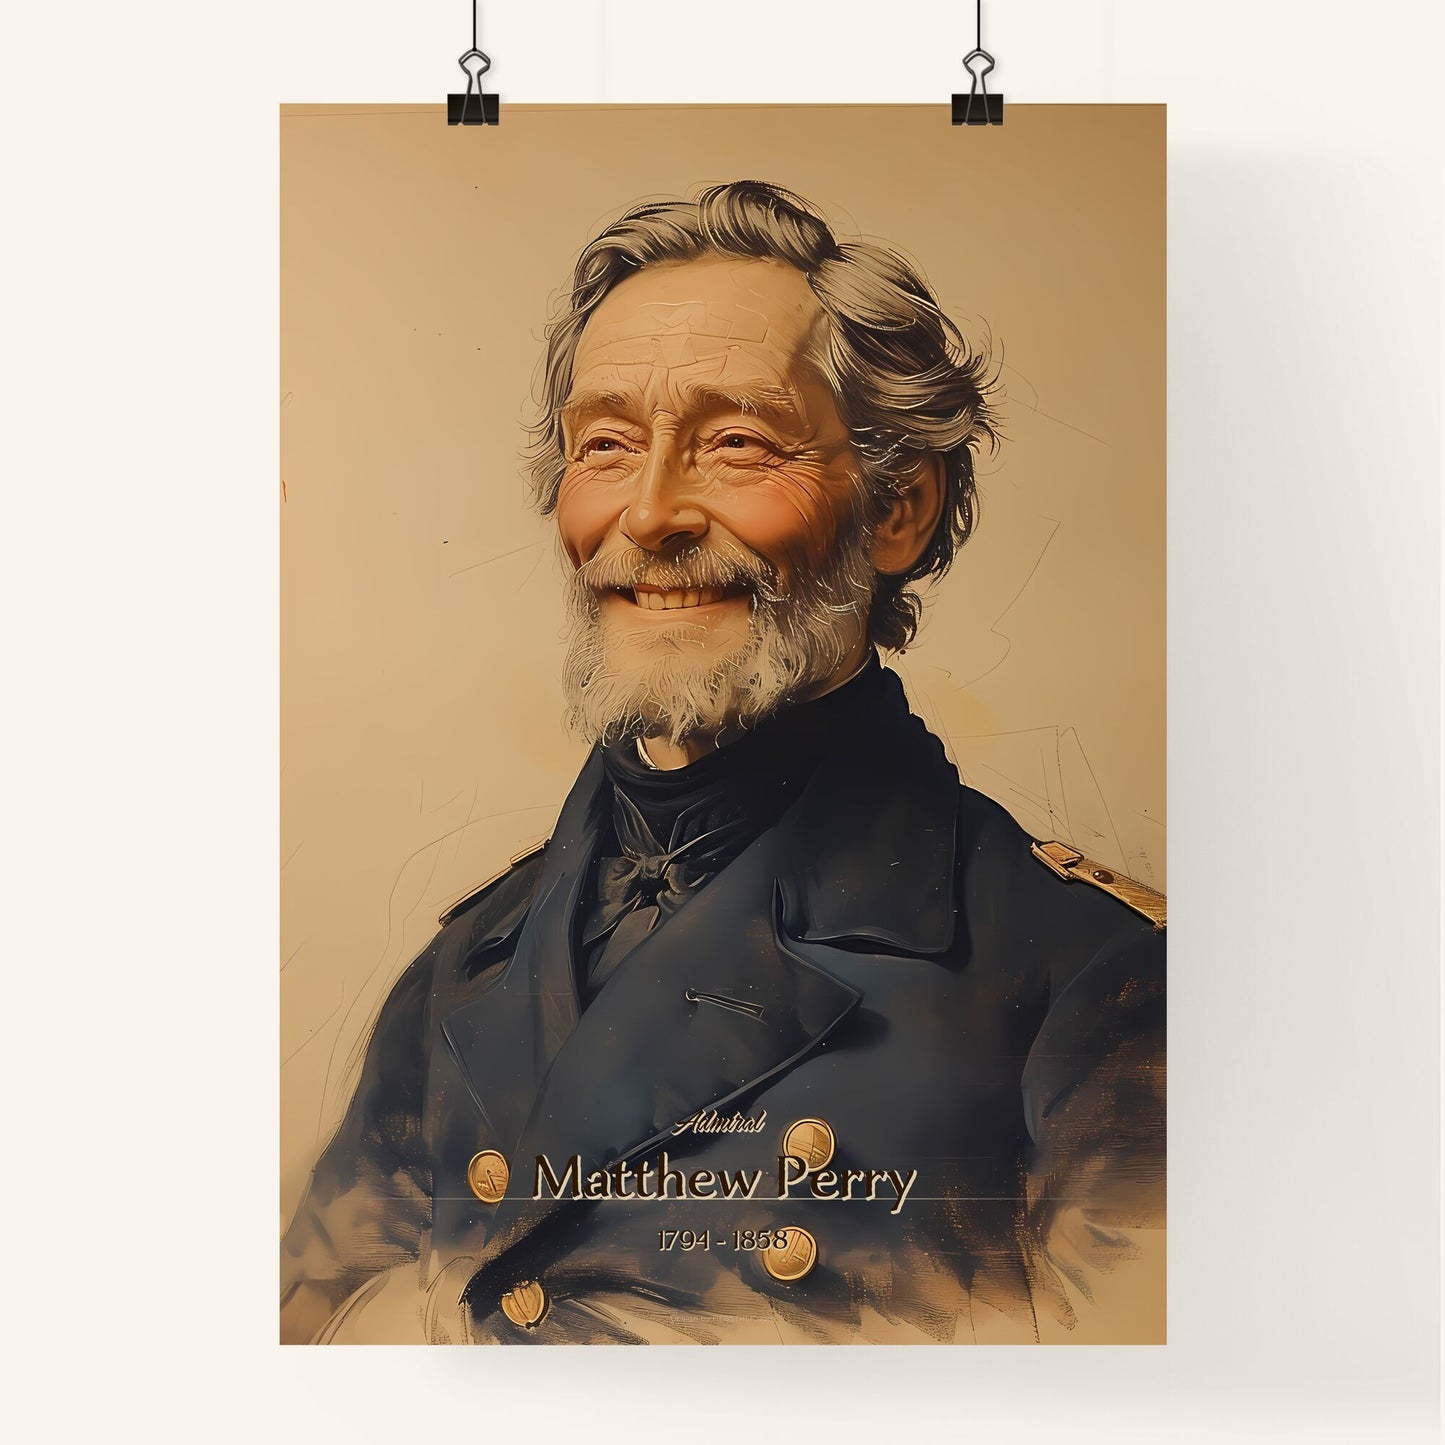 Admiral, Matthew Perry, 1794 - 1858, A Poster of a man in a military uniform Default Title